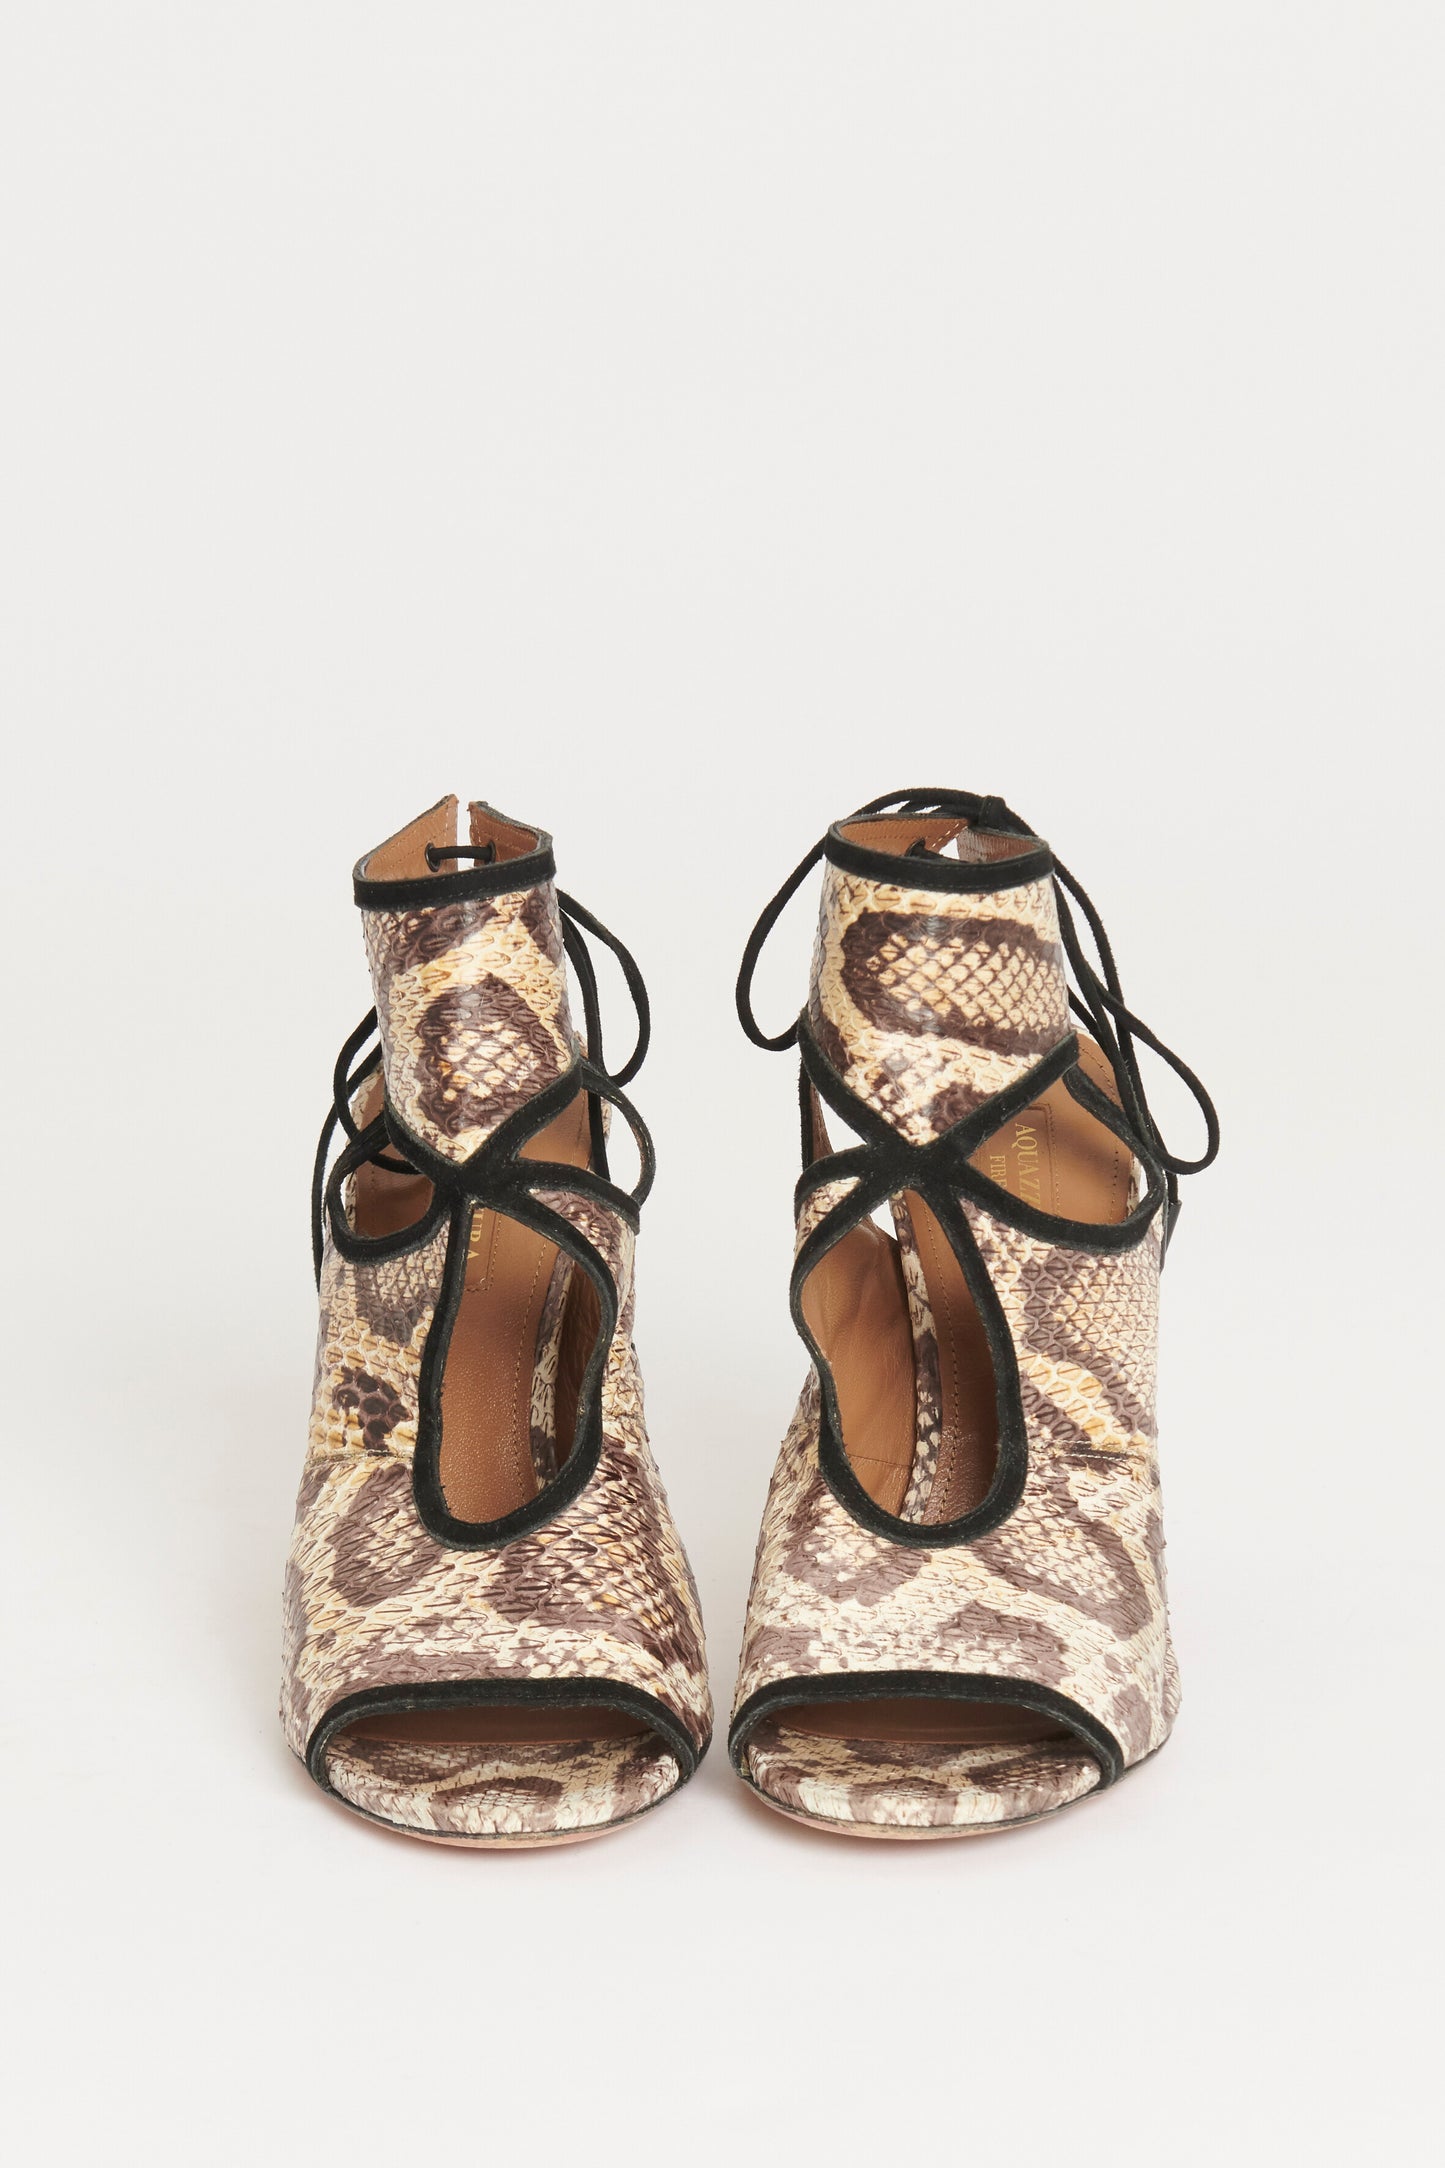 Cream/Brown Snakeskin Preowned Sandals With Cutout